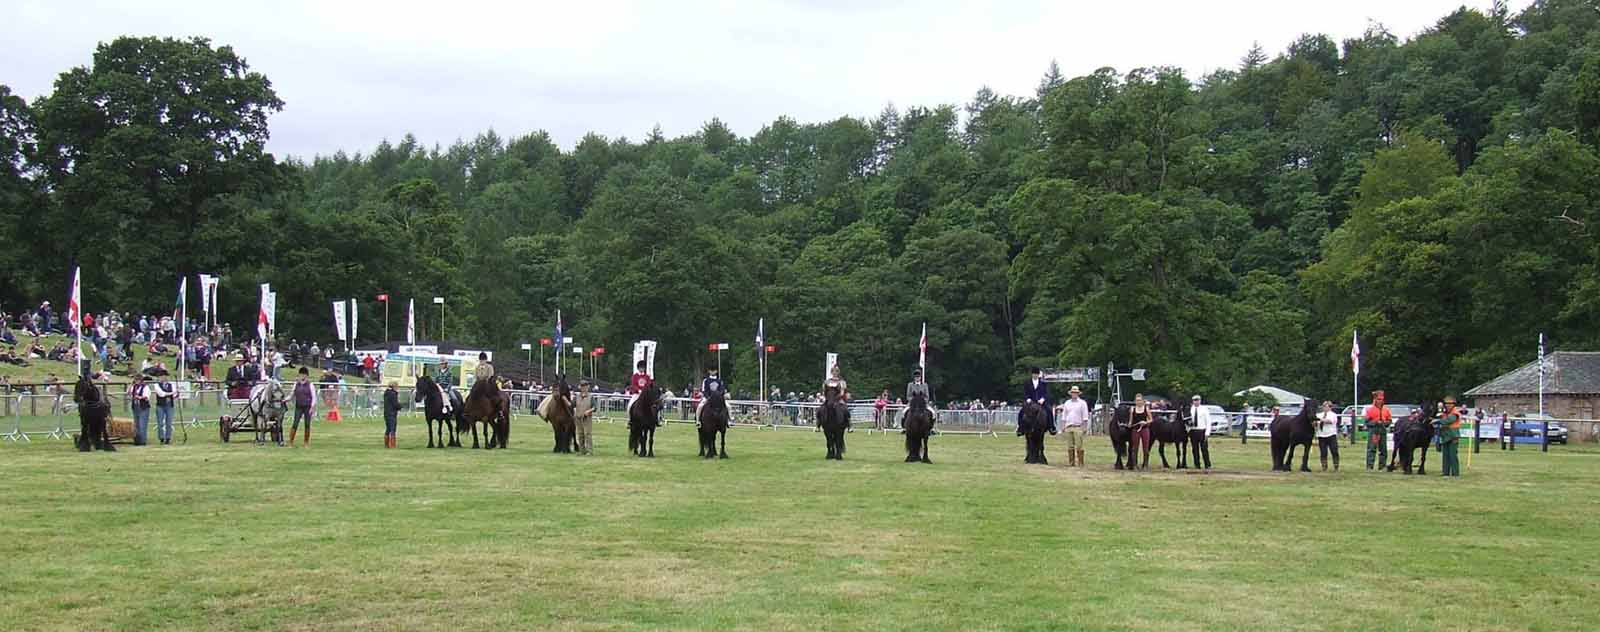 line up of Fell ponies in the main arena at Lowther Show, 2015